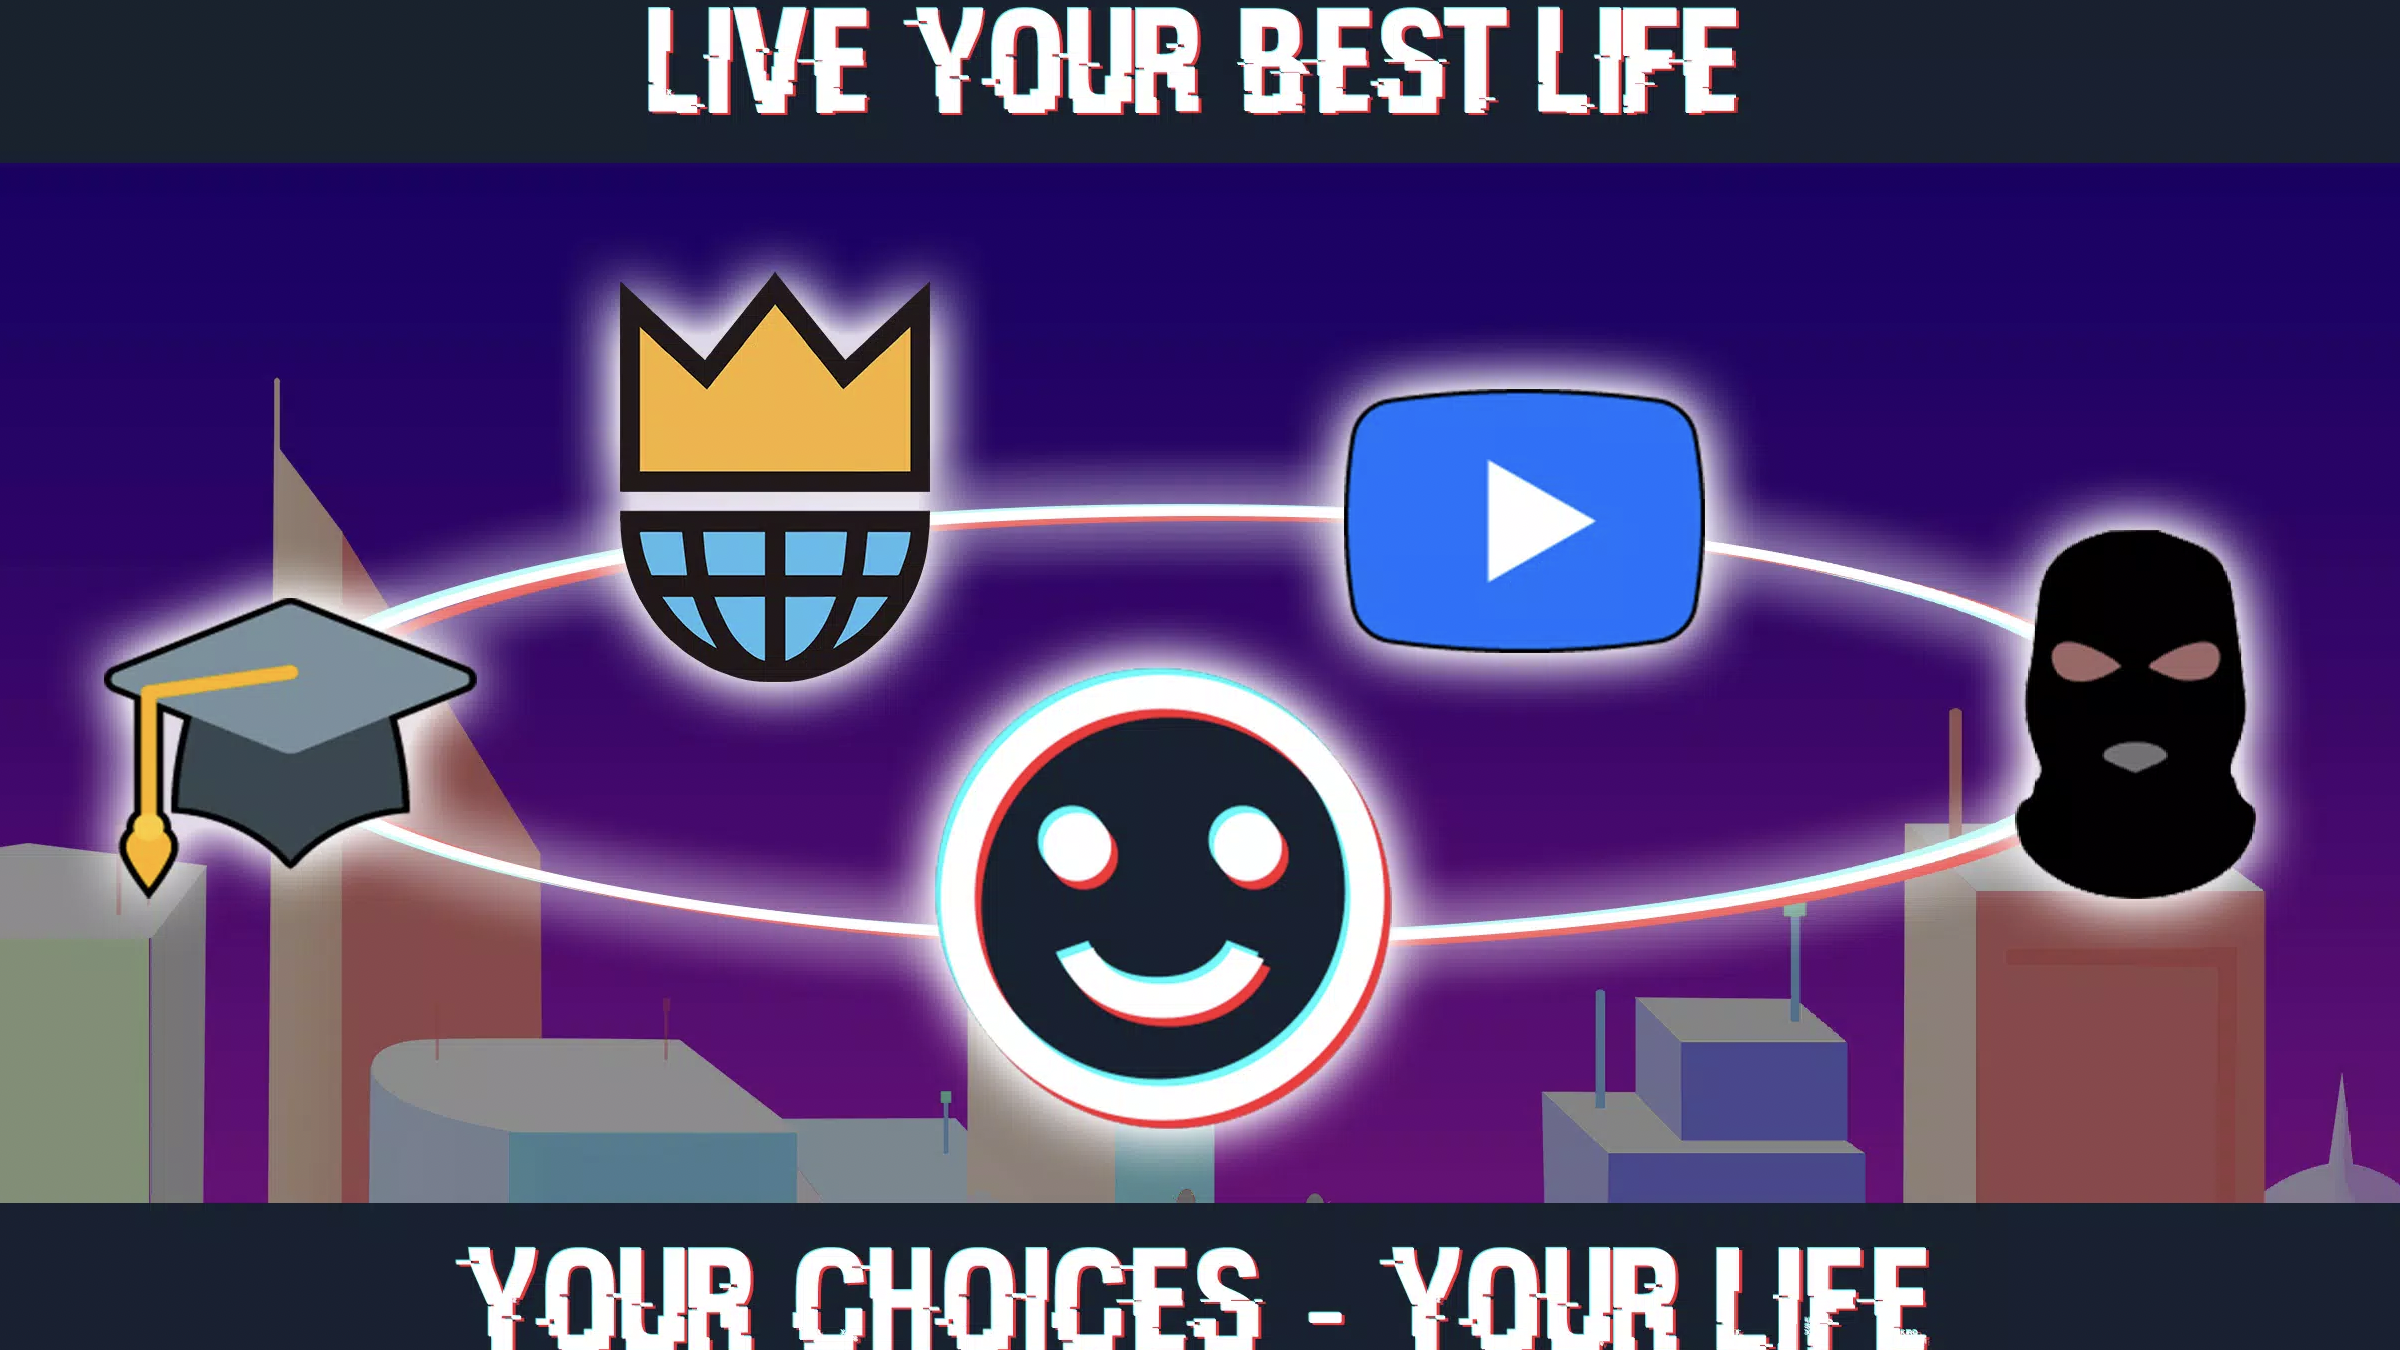 Text reads "Life your best life" on top and "Your choices- your life" on the bottom. The middle has several symbols including a blue version of youtube's logo, a black ski mask, a spooky happy face, a graduation cap, and a half globe with a crown on top.